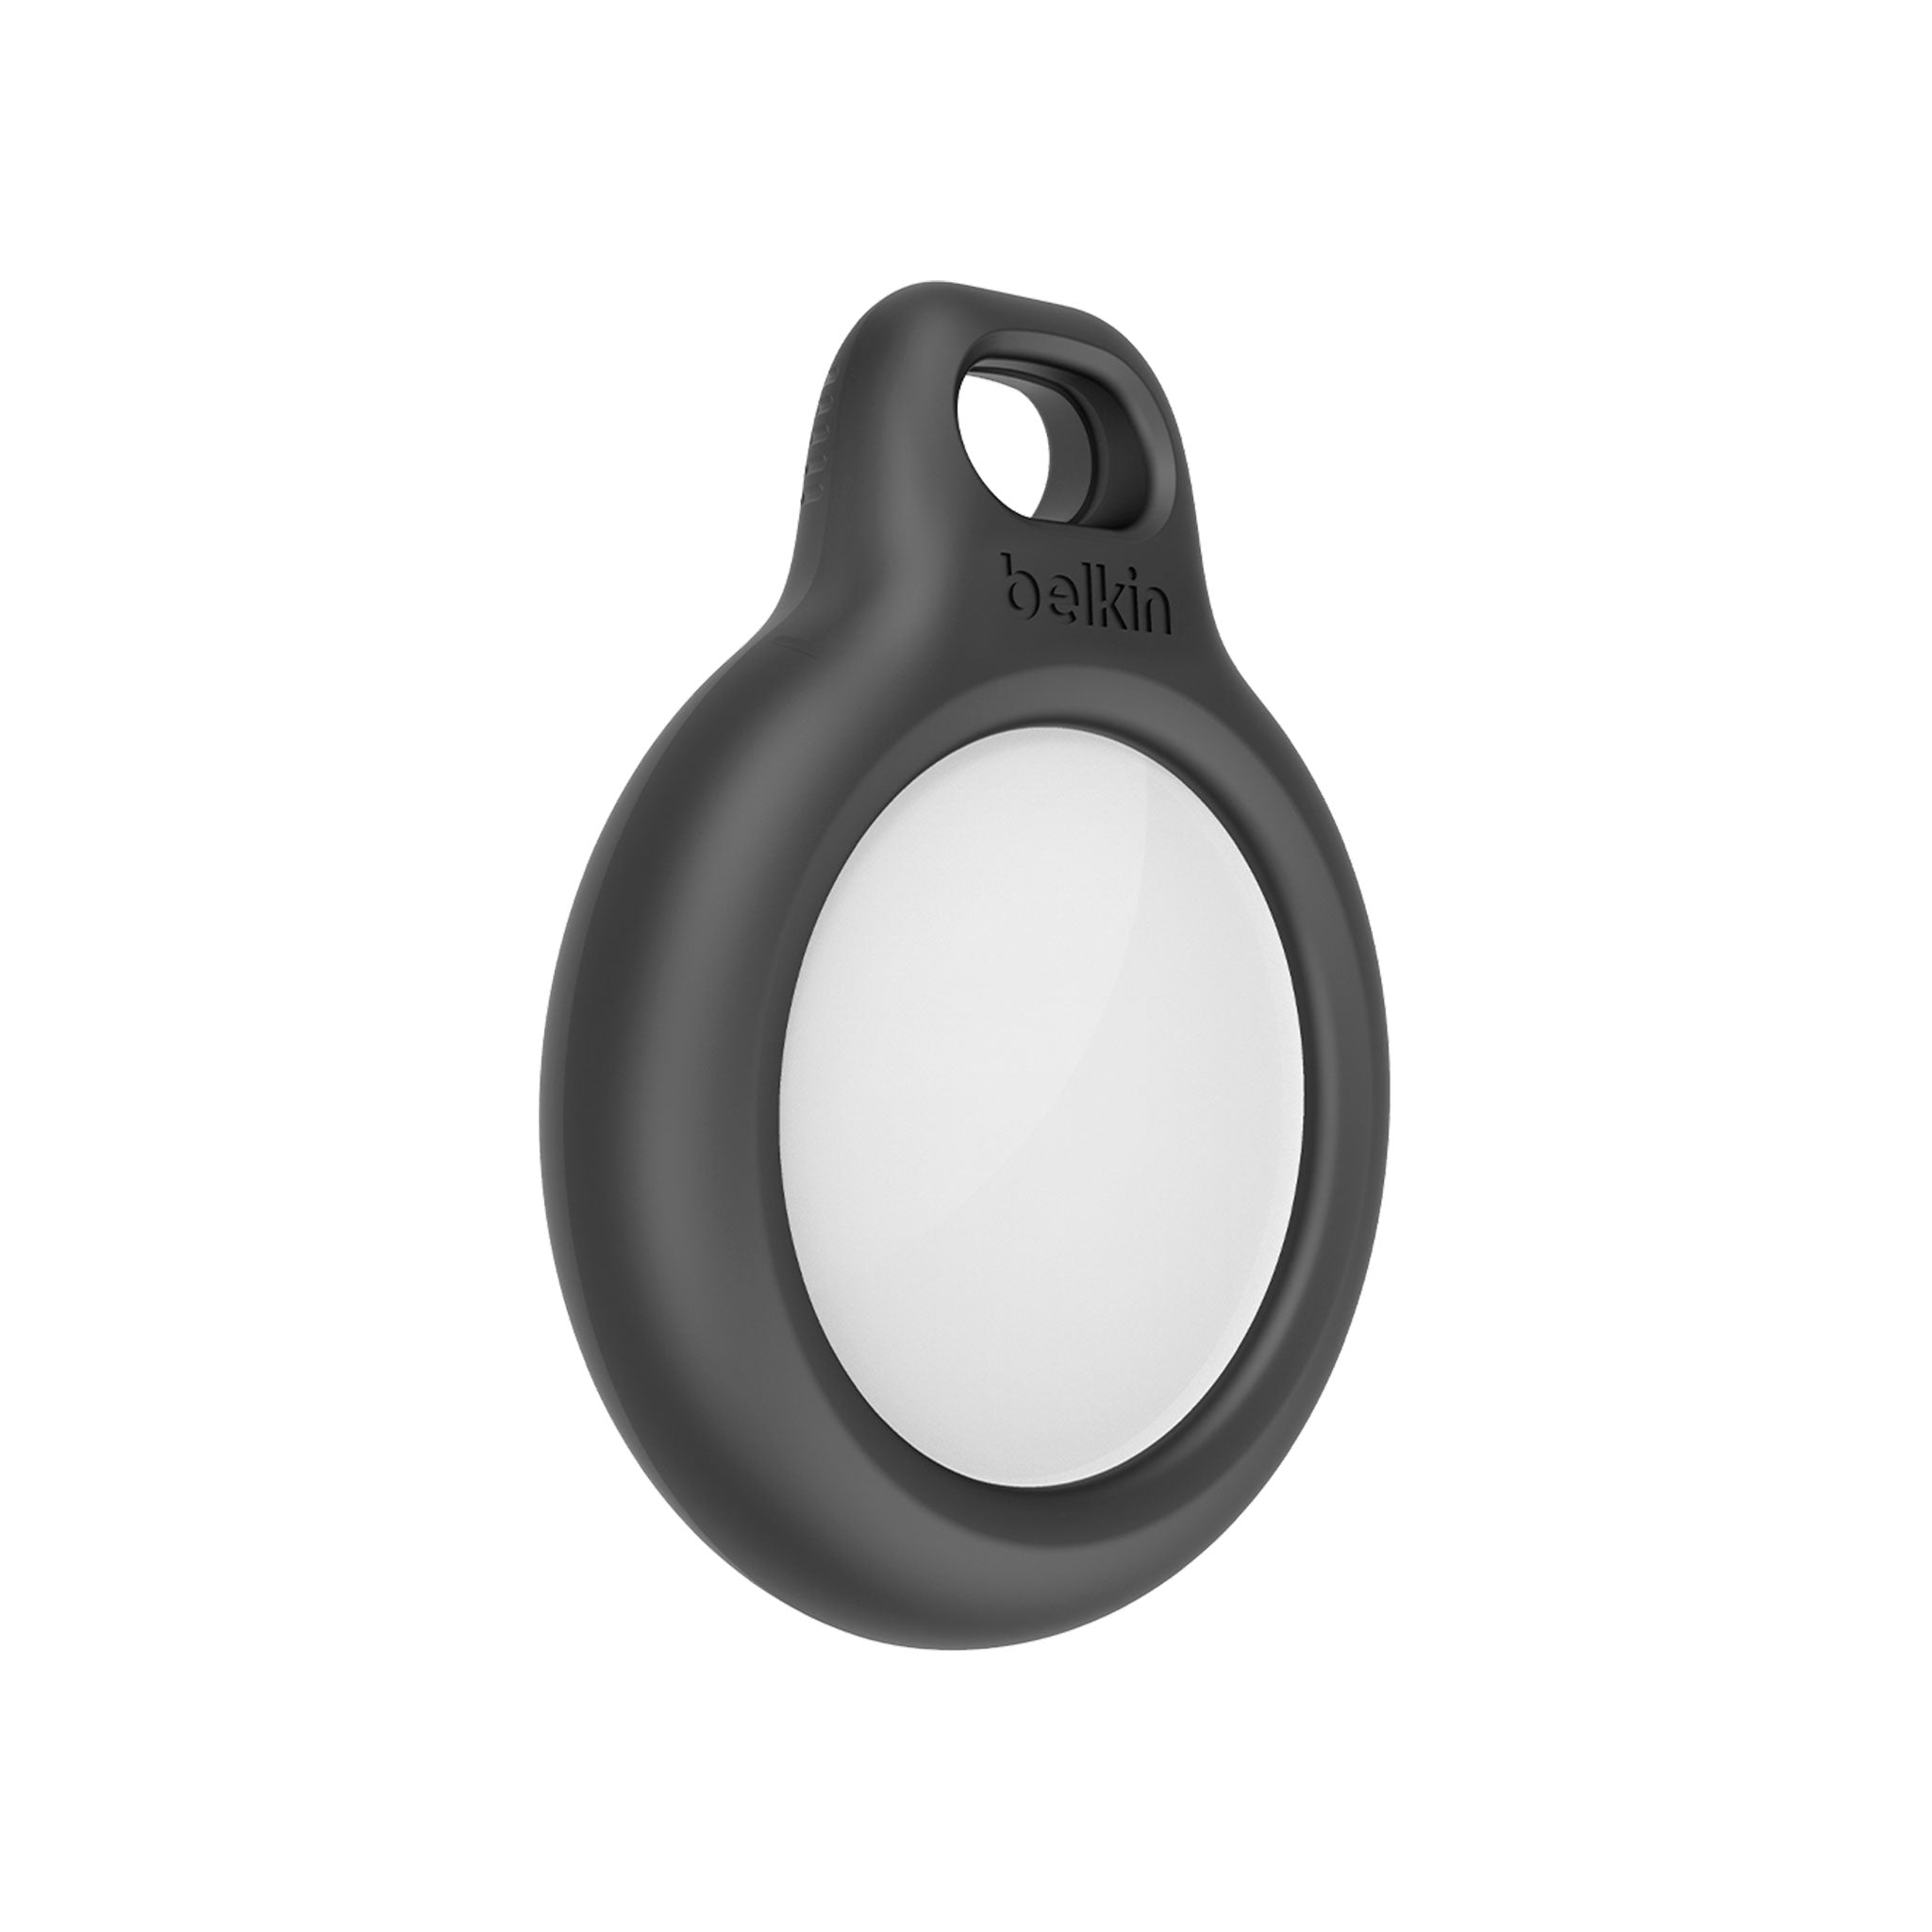 Belkin - Secure Holder With Key Ring For Apple Airtag - Black